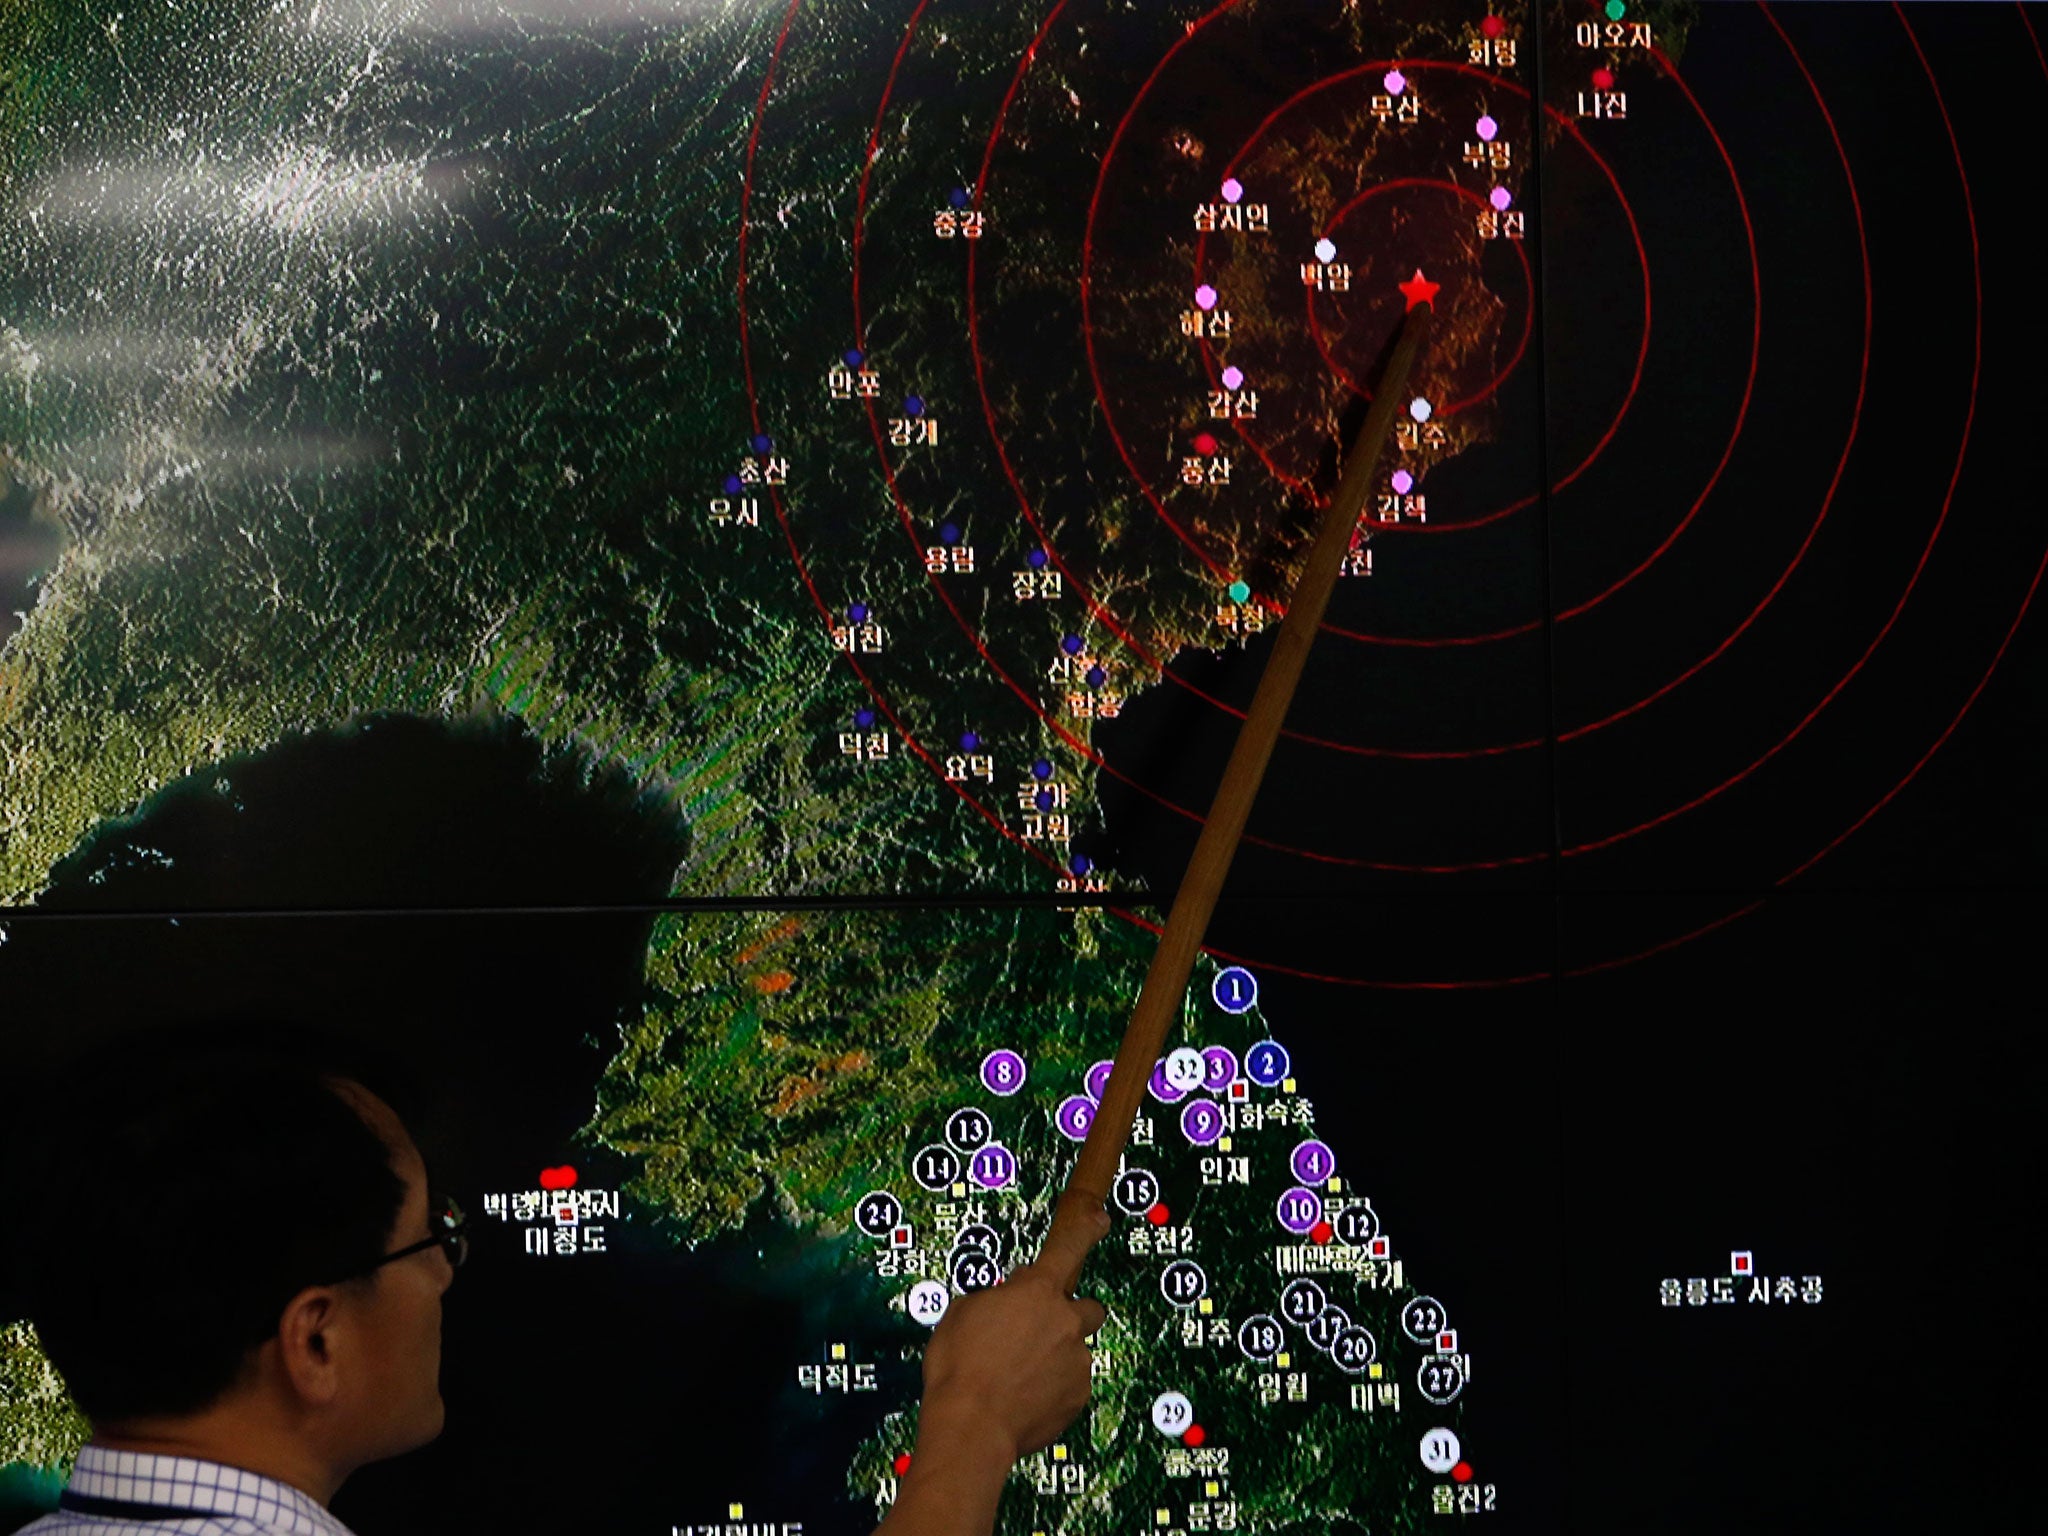 Ryoo Yong-Gyu, director of the earthquake monitoring division of South Korea's Meteorological Administration, shows seismic activity from a test in North Korea in Seoul on 9 September